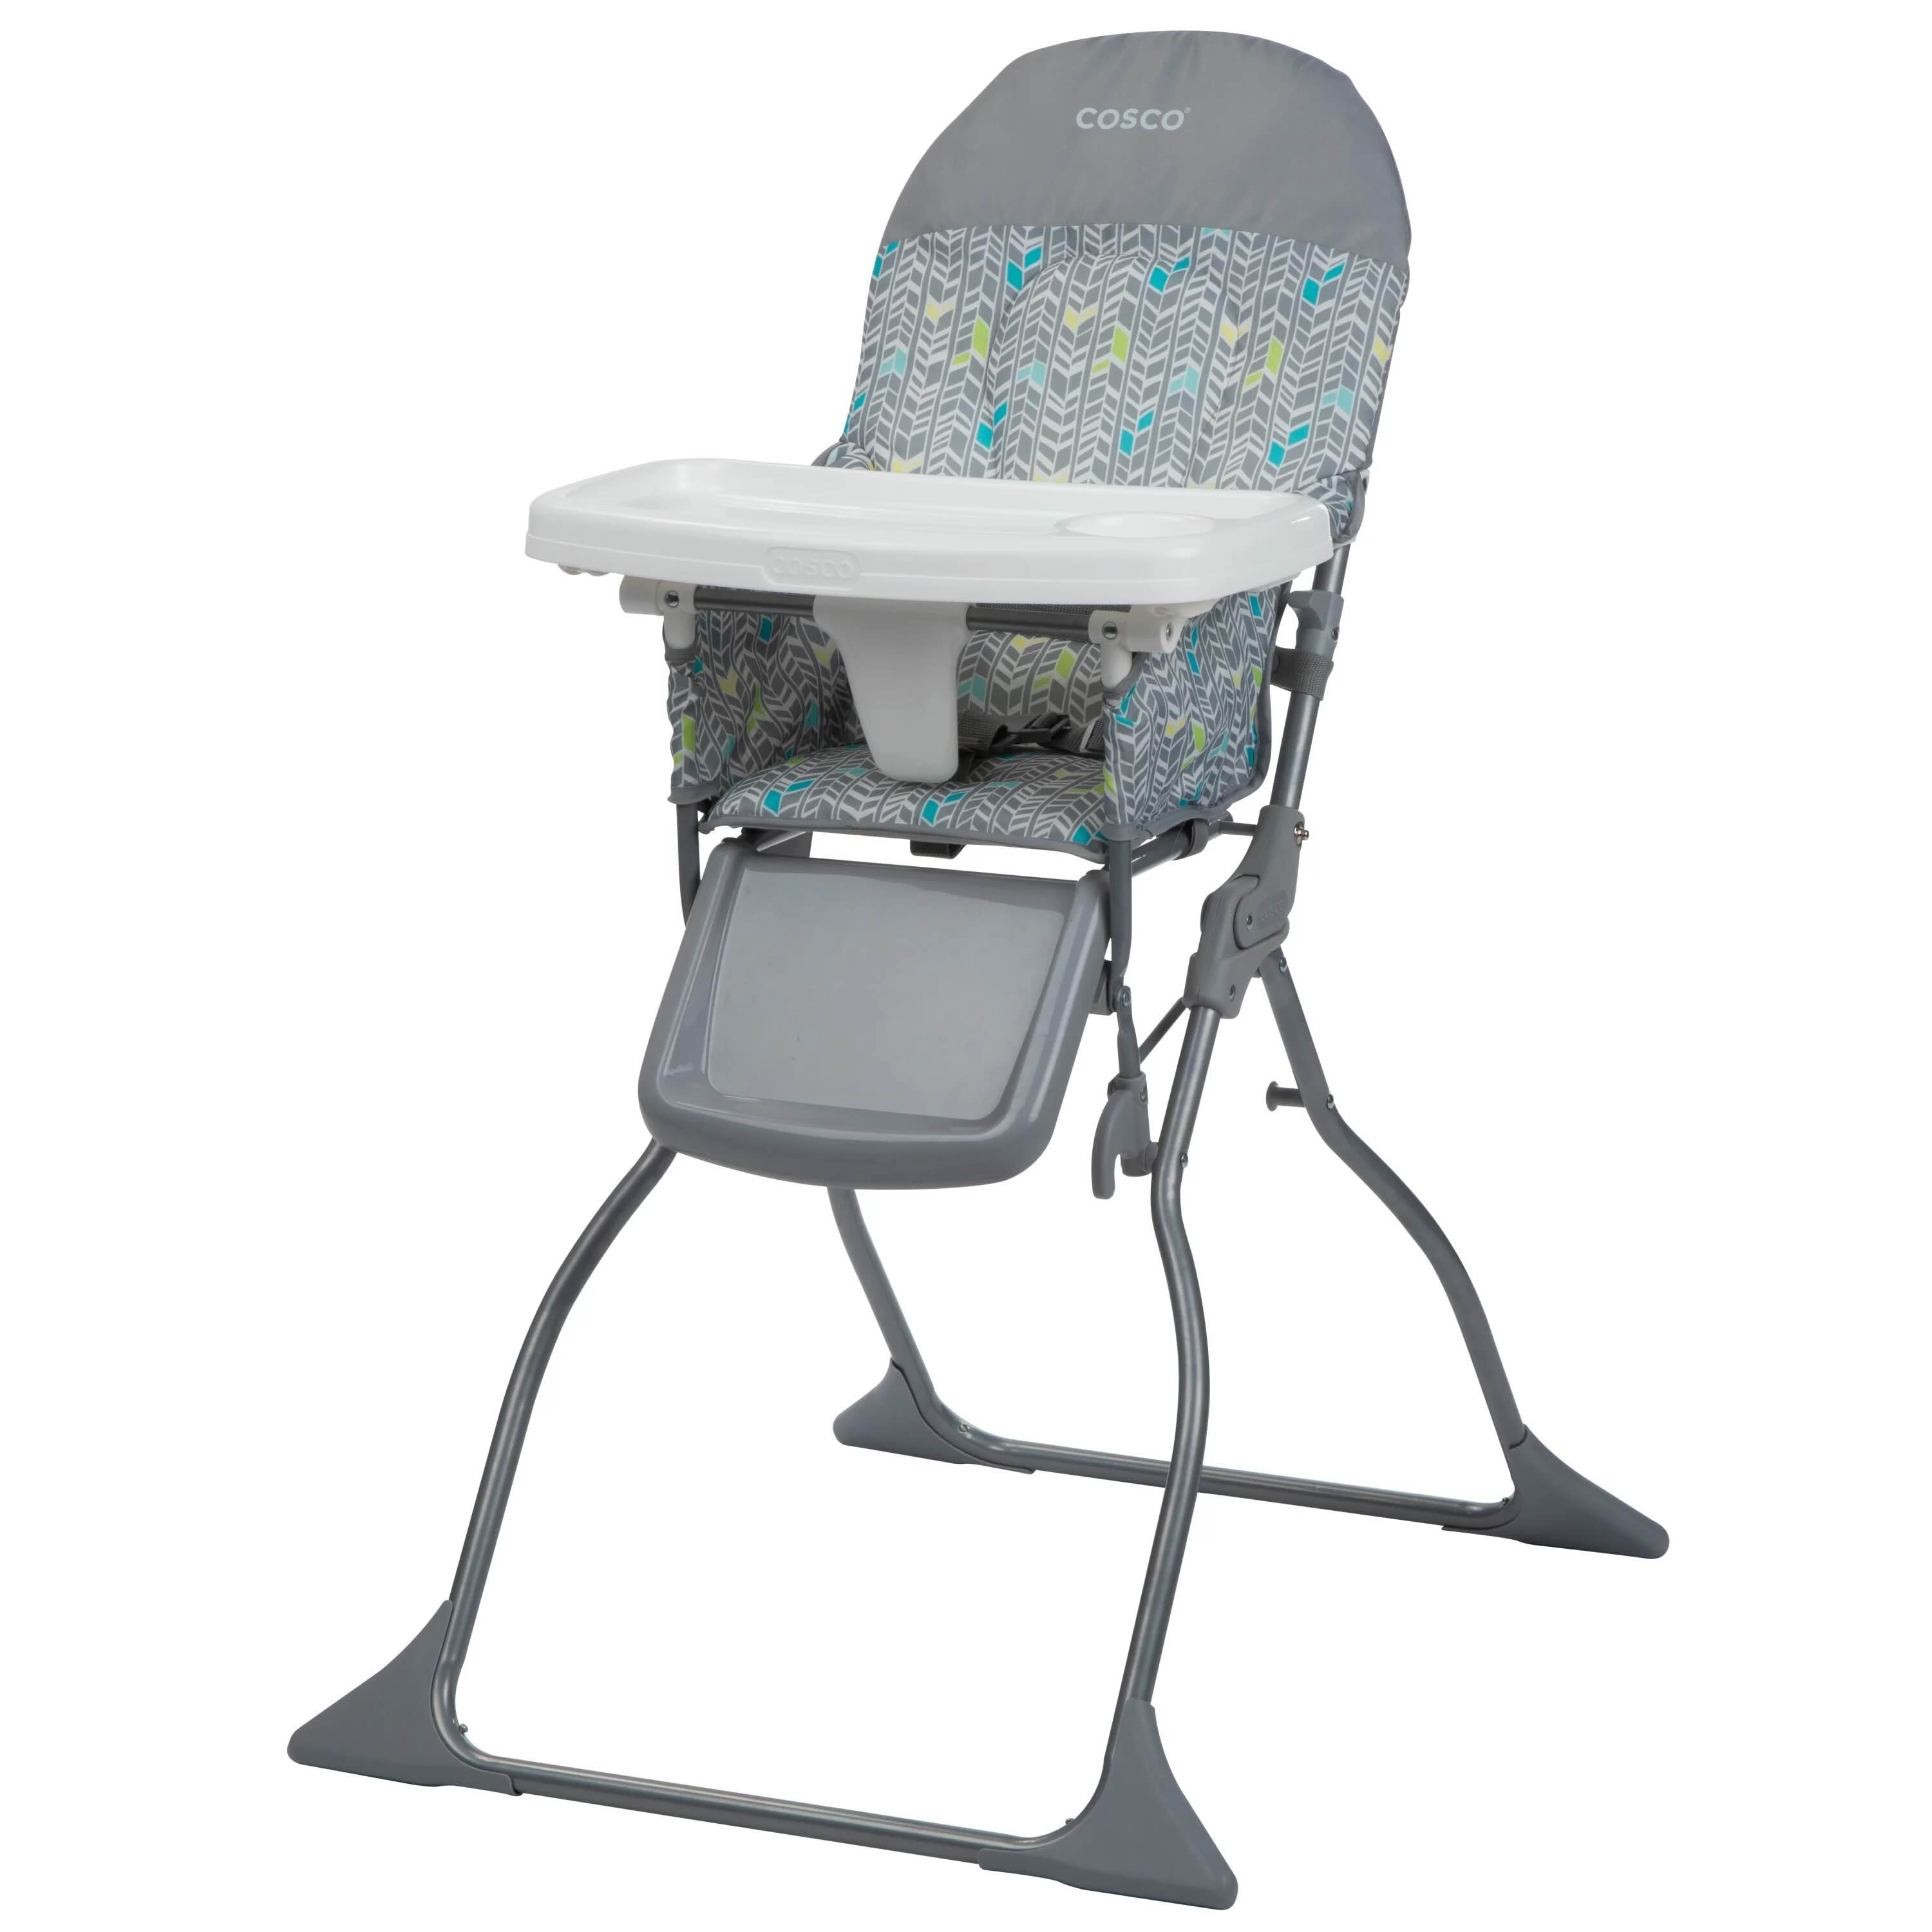 How To Remove Cosco High Chair Cover